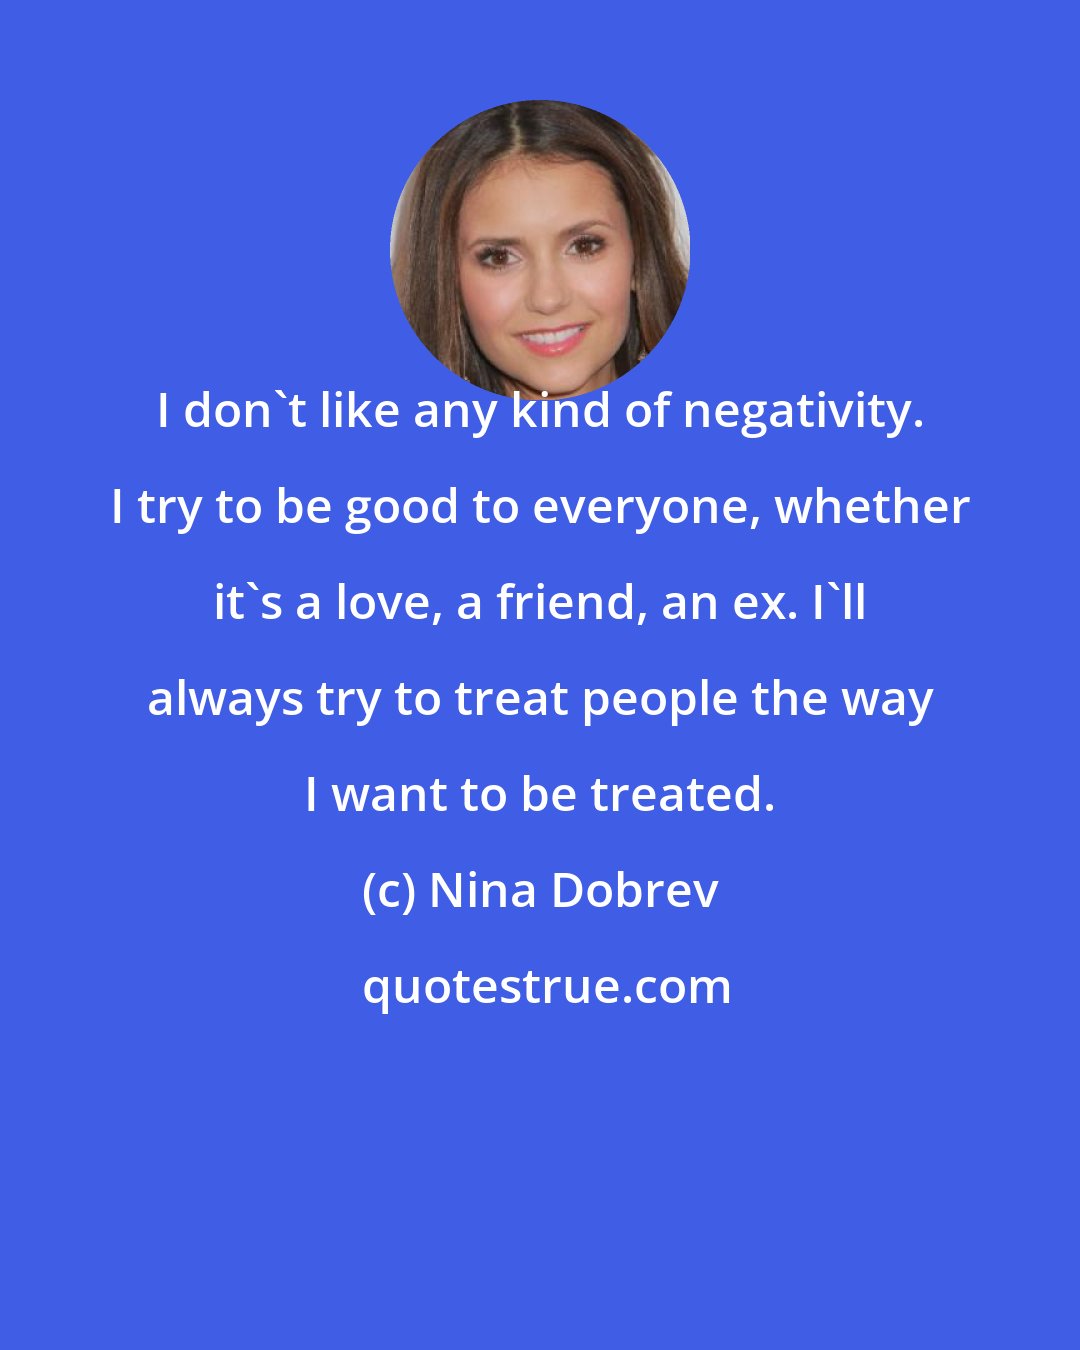 Nina Dobrev: I don't like any kind of negativity. I try to be good to everyone, whether it's a love, a friend, an ex. I'll always try to treat people the way I want to be treated.